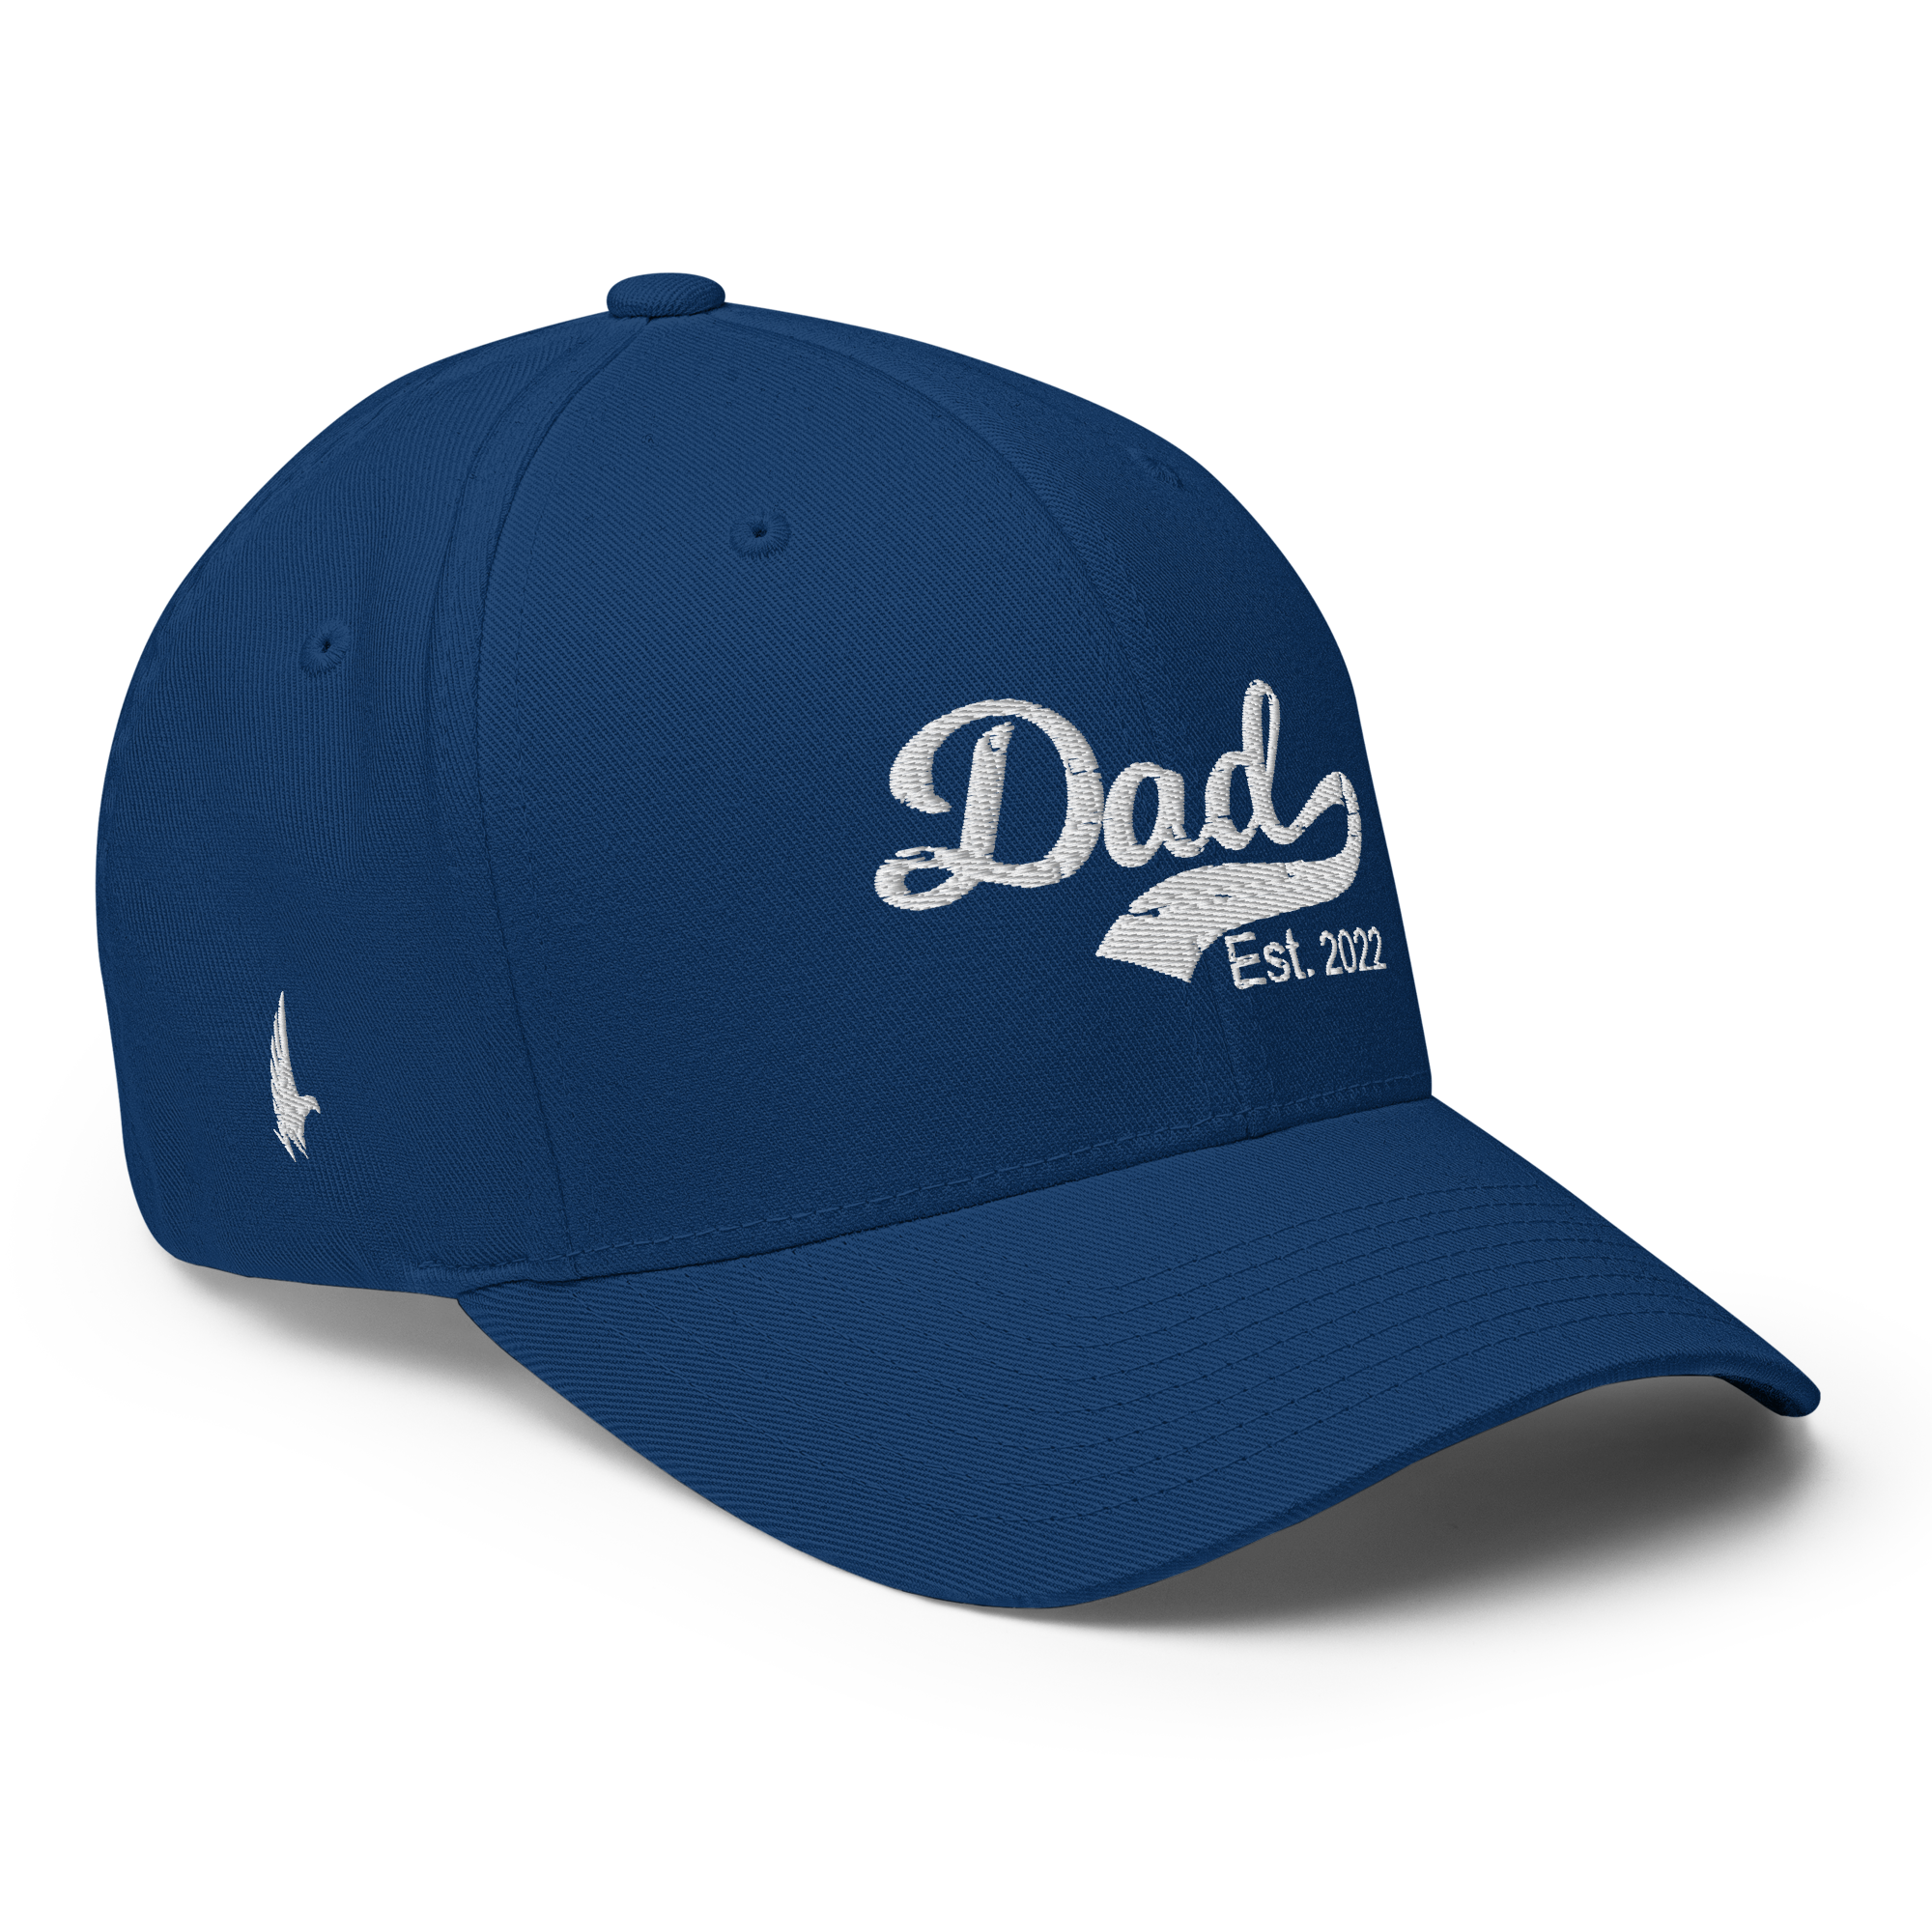 Dad Est 2022 Fitted Hat - Blue - Loyalty Vibes